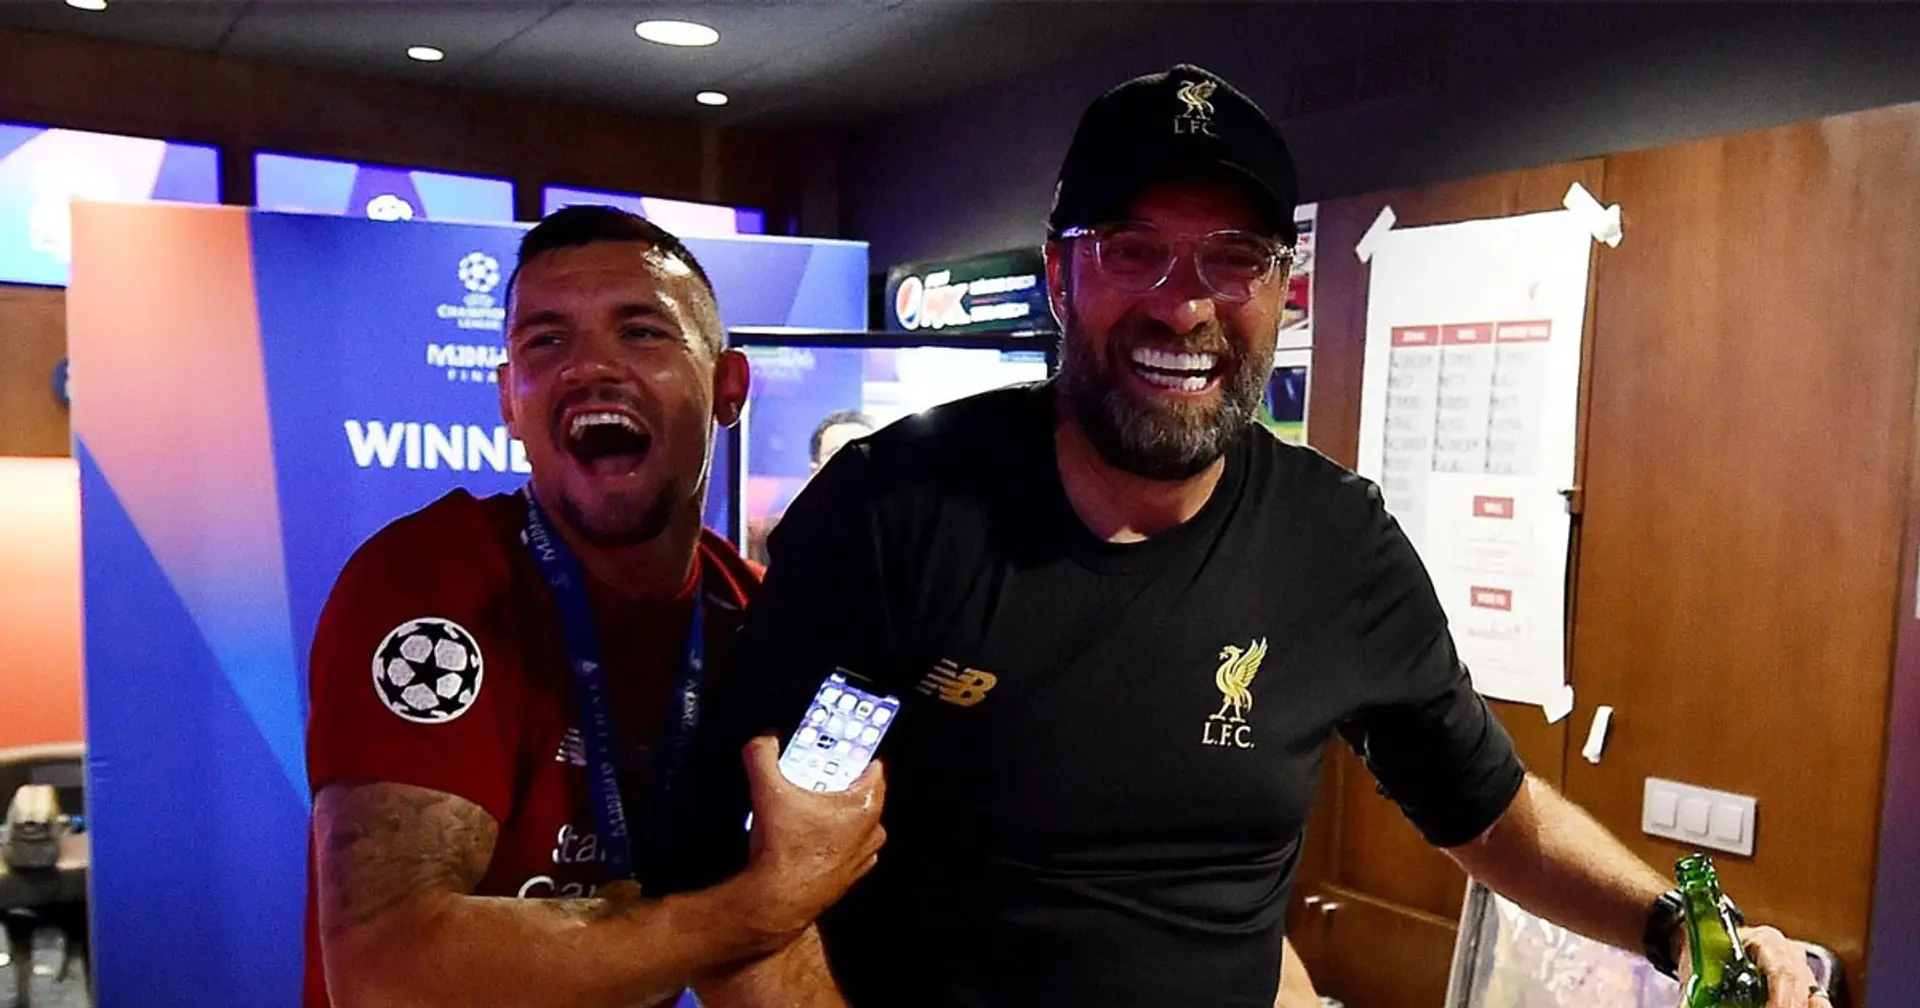 Klopp pays passionate tribute to Dejan Lovren: 'Another Liverpool legend who leaves the club'